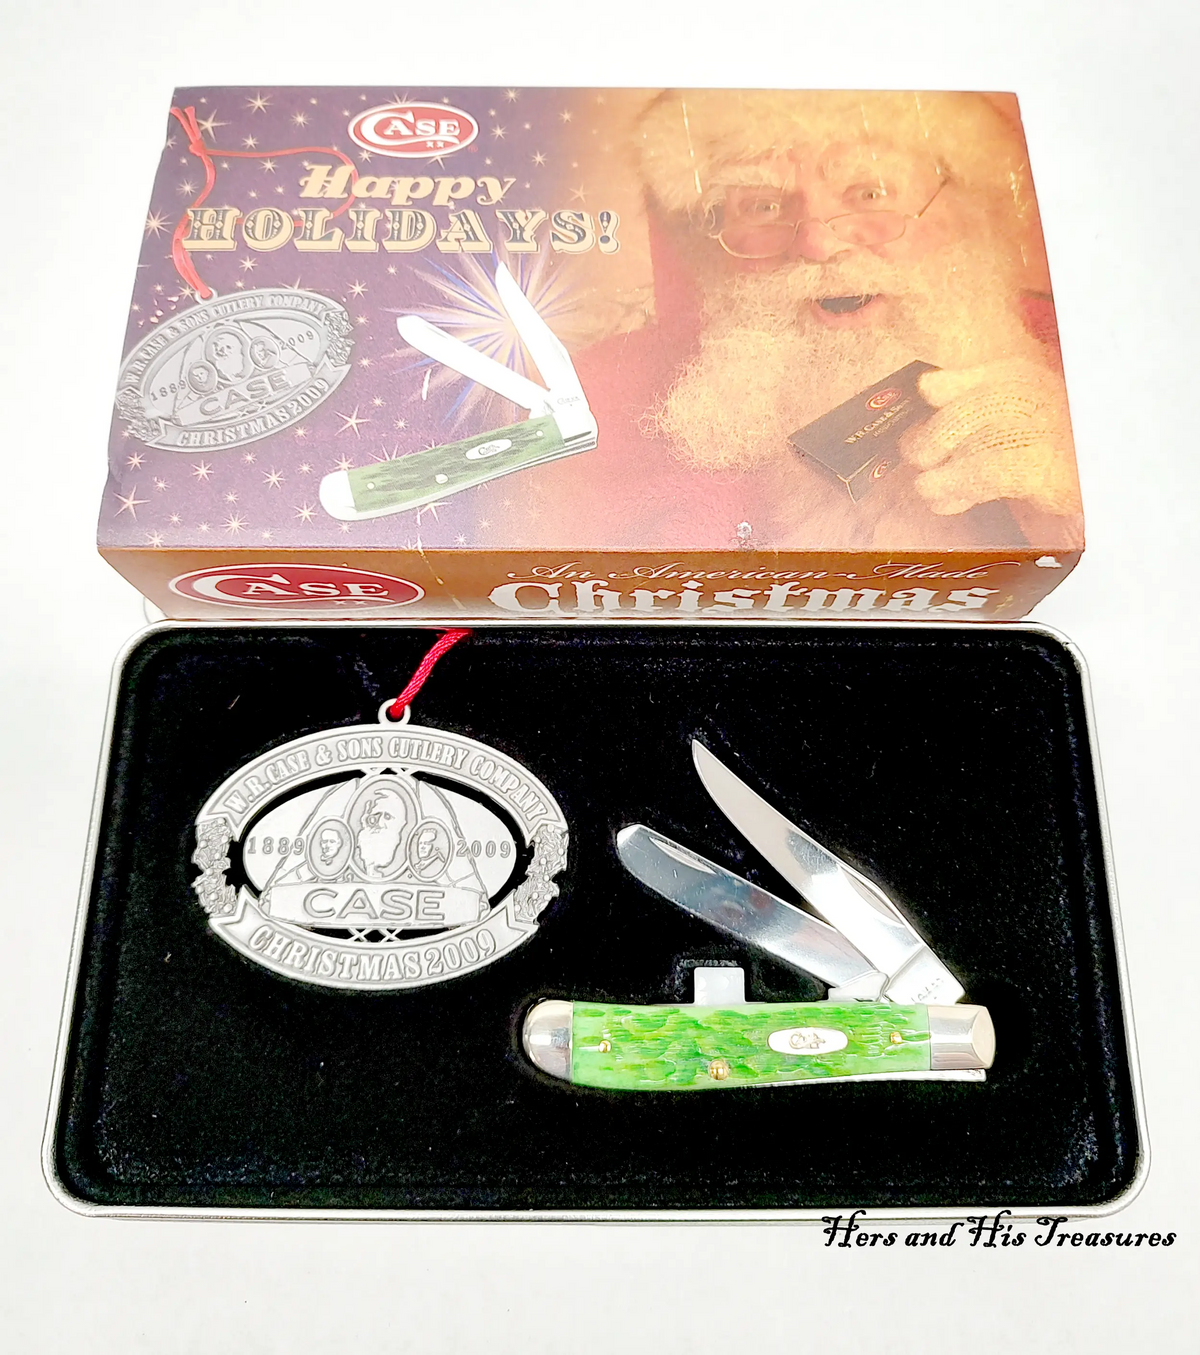 New 2009 Case XX 6207 Happy Holidays Green Bone Pocket Knife - Hers and His Treasures